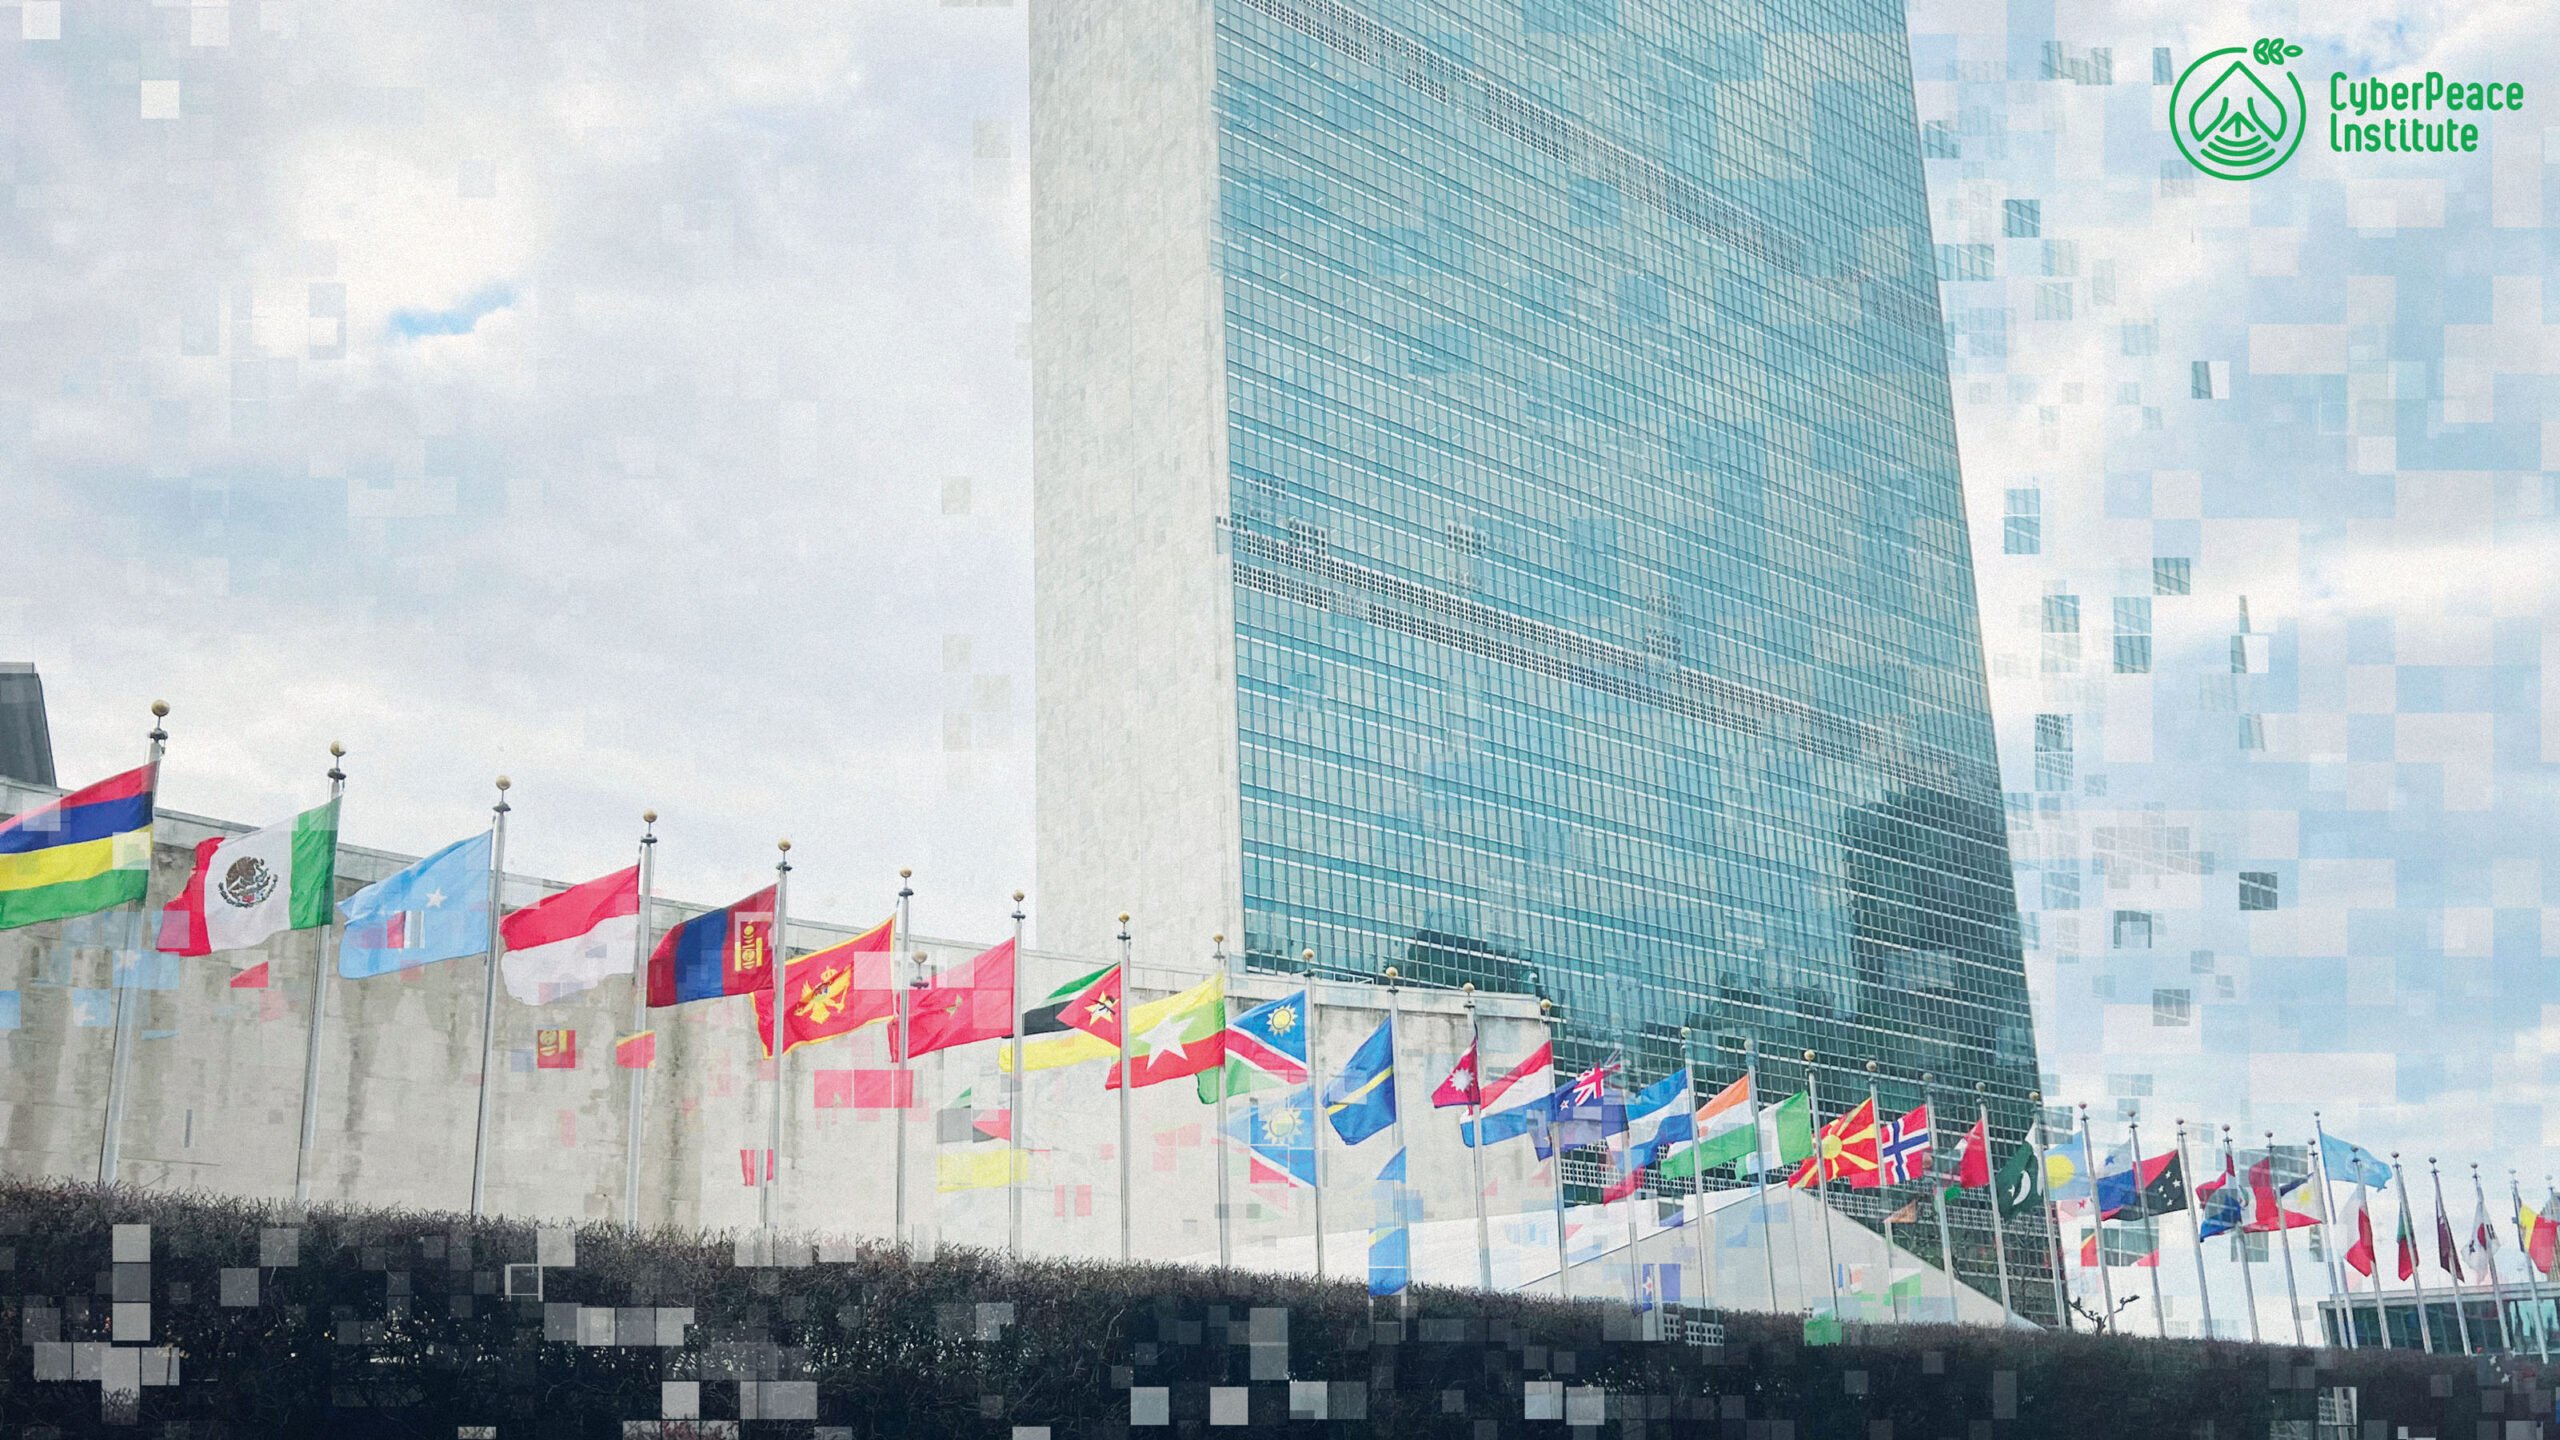 The proposed UN Cybercrime Convention risks making cyberspace less secure